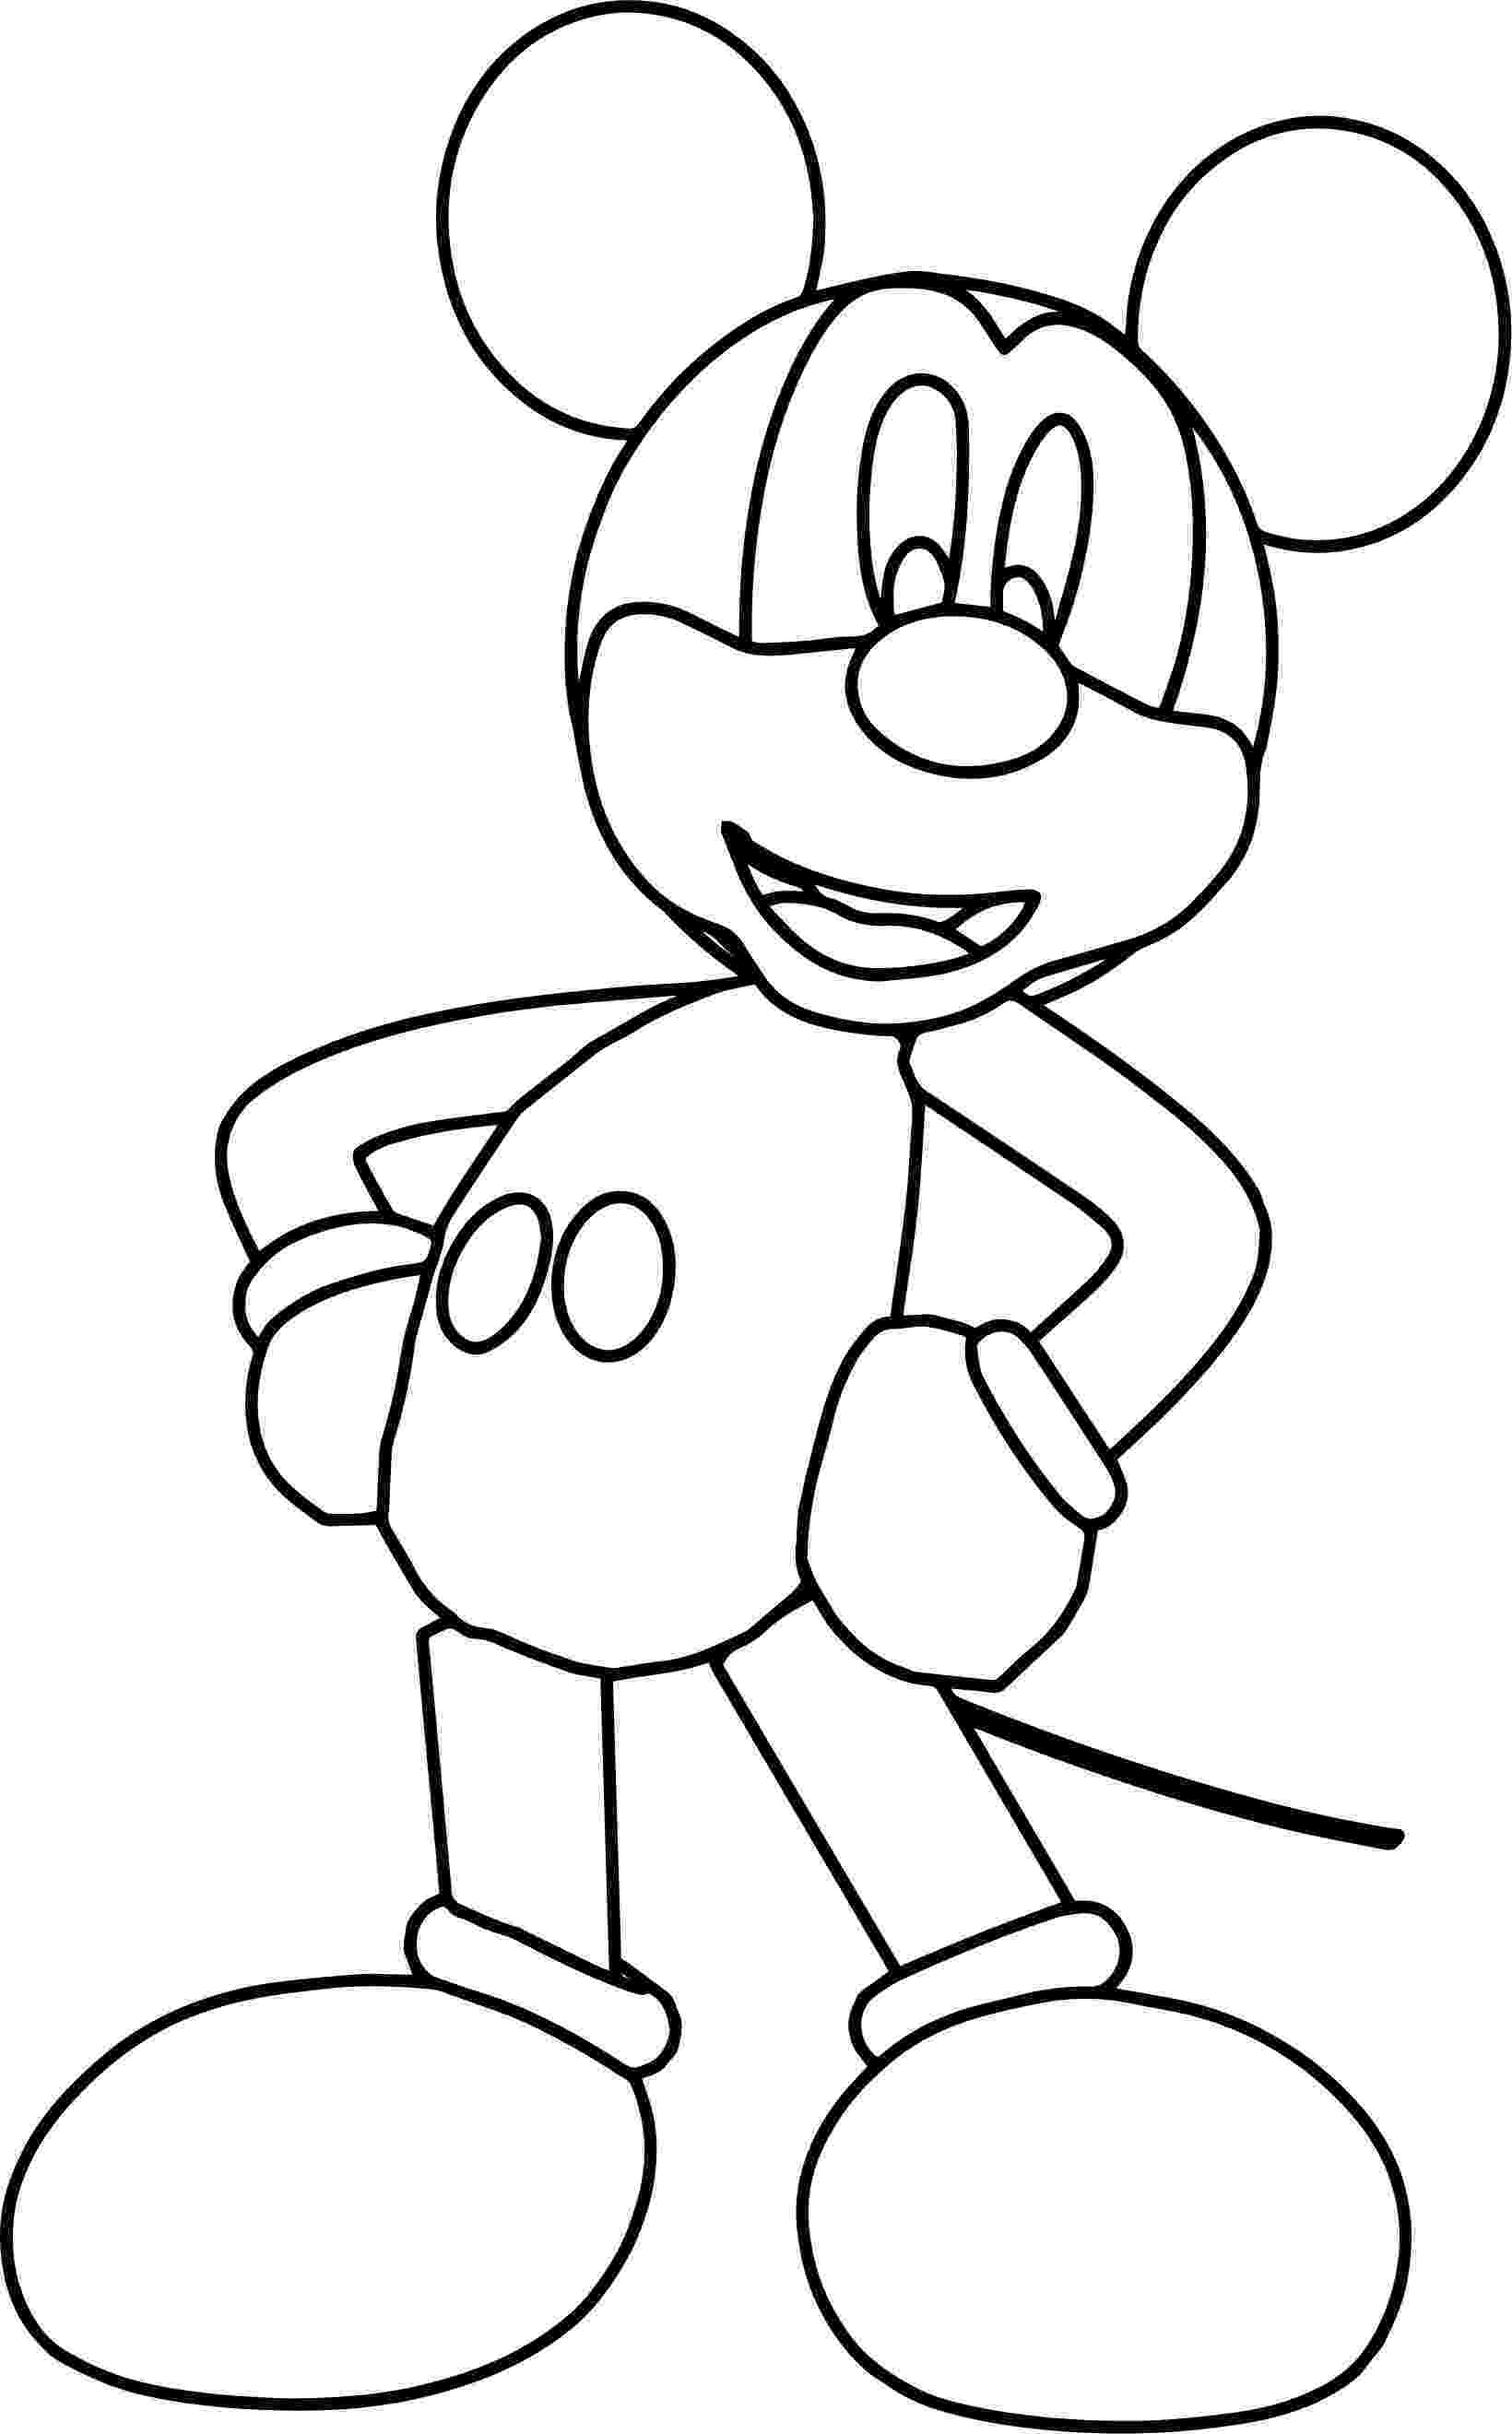 cartoons coloring pictures cartoon character mickey coloring page wecoloringpagecom coloring cartoons pictures 